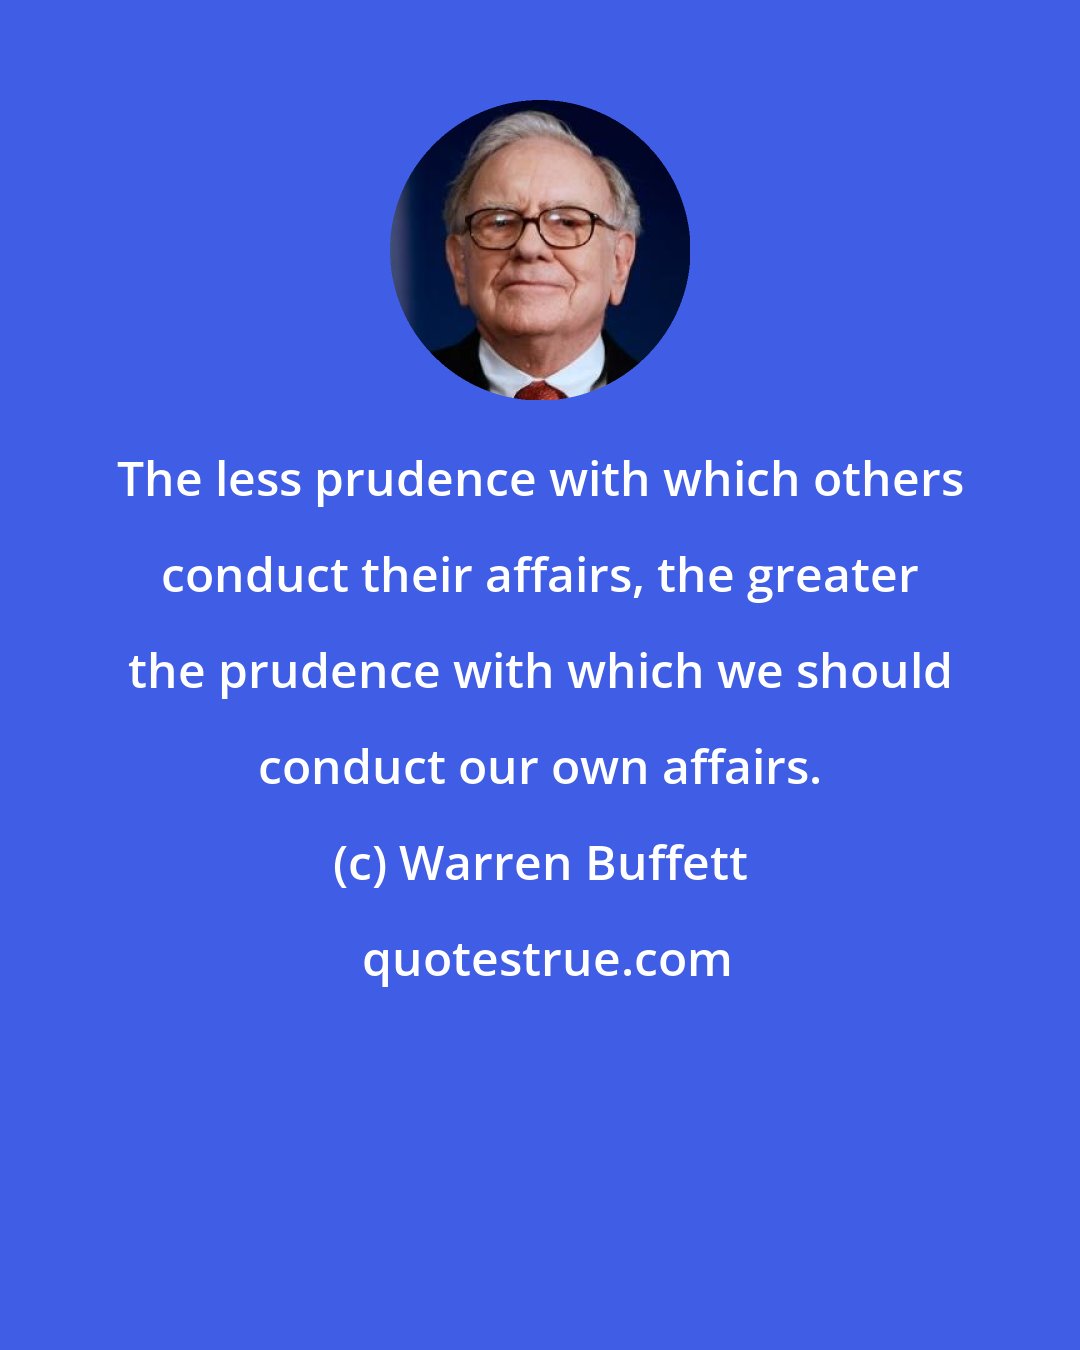 Warren Buffett: The less prudence with which others conduct their affairs, the greater the prudence with which we should conduct our own affairs.